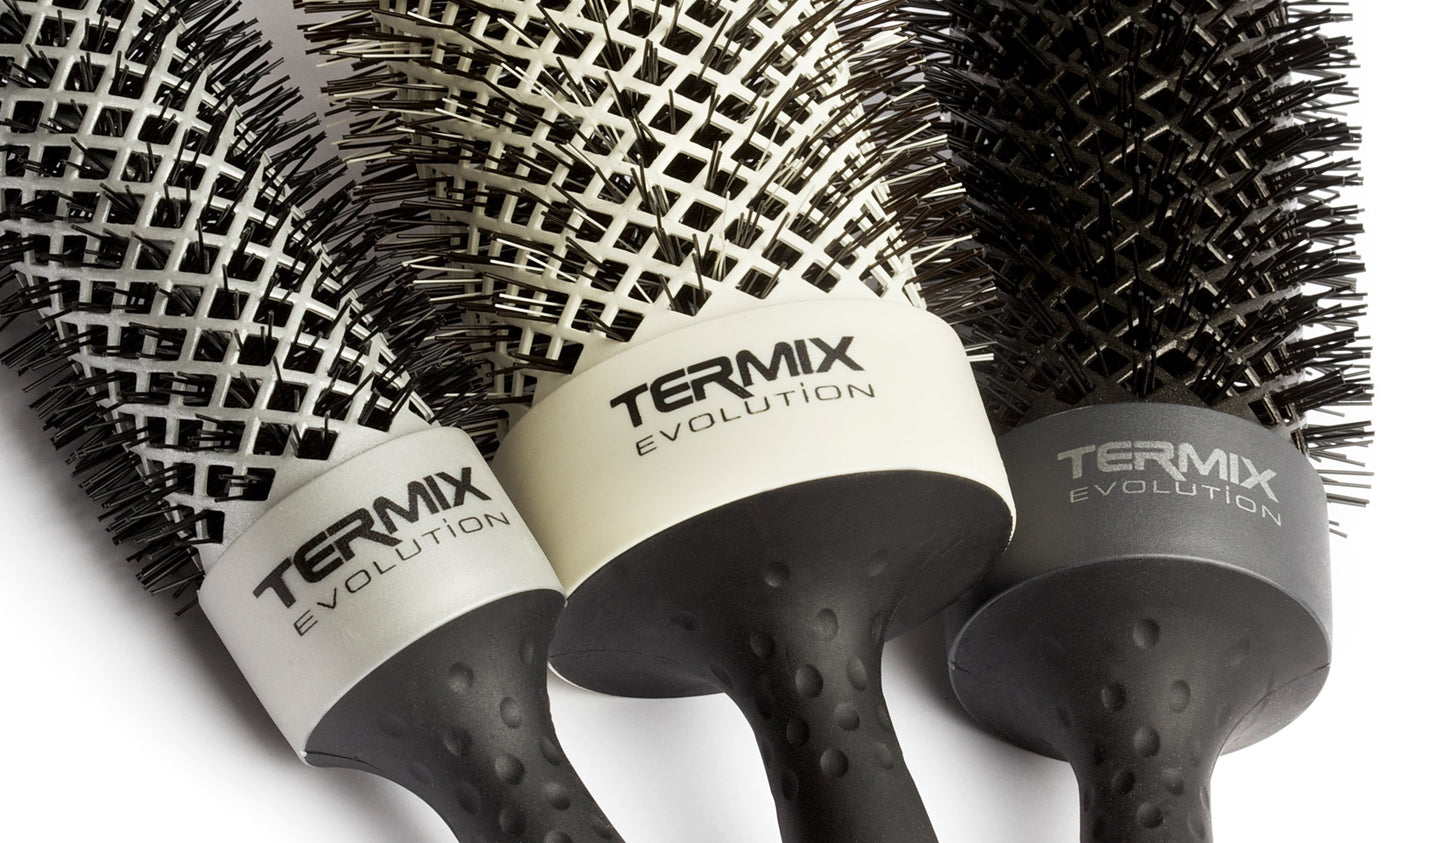 Termix Evolution Styling Brush 60mm PLUS for Thick Hair